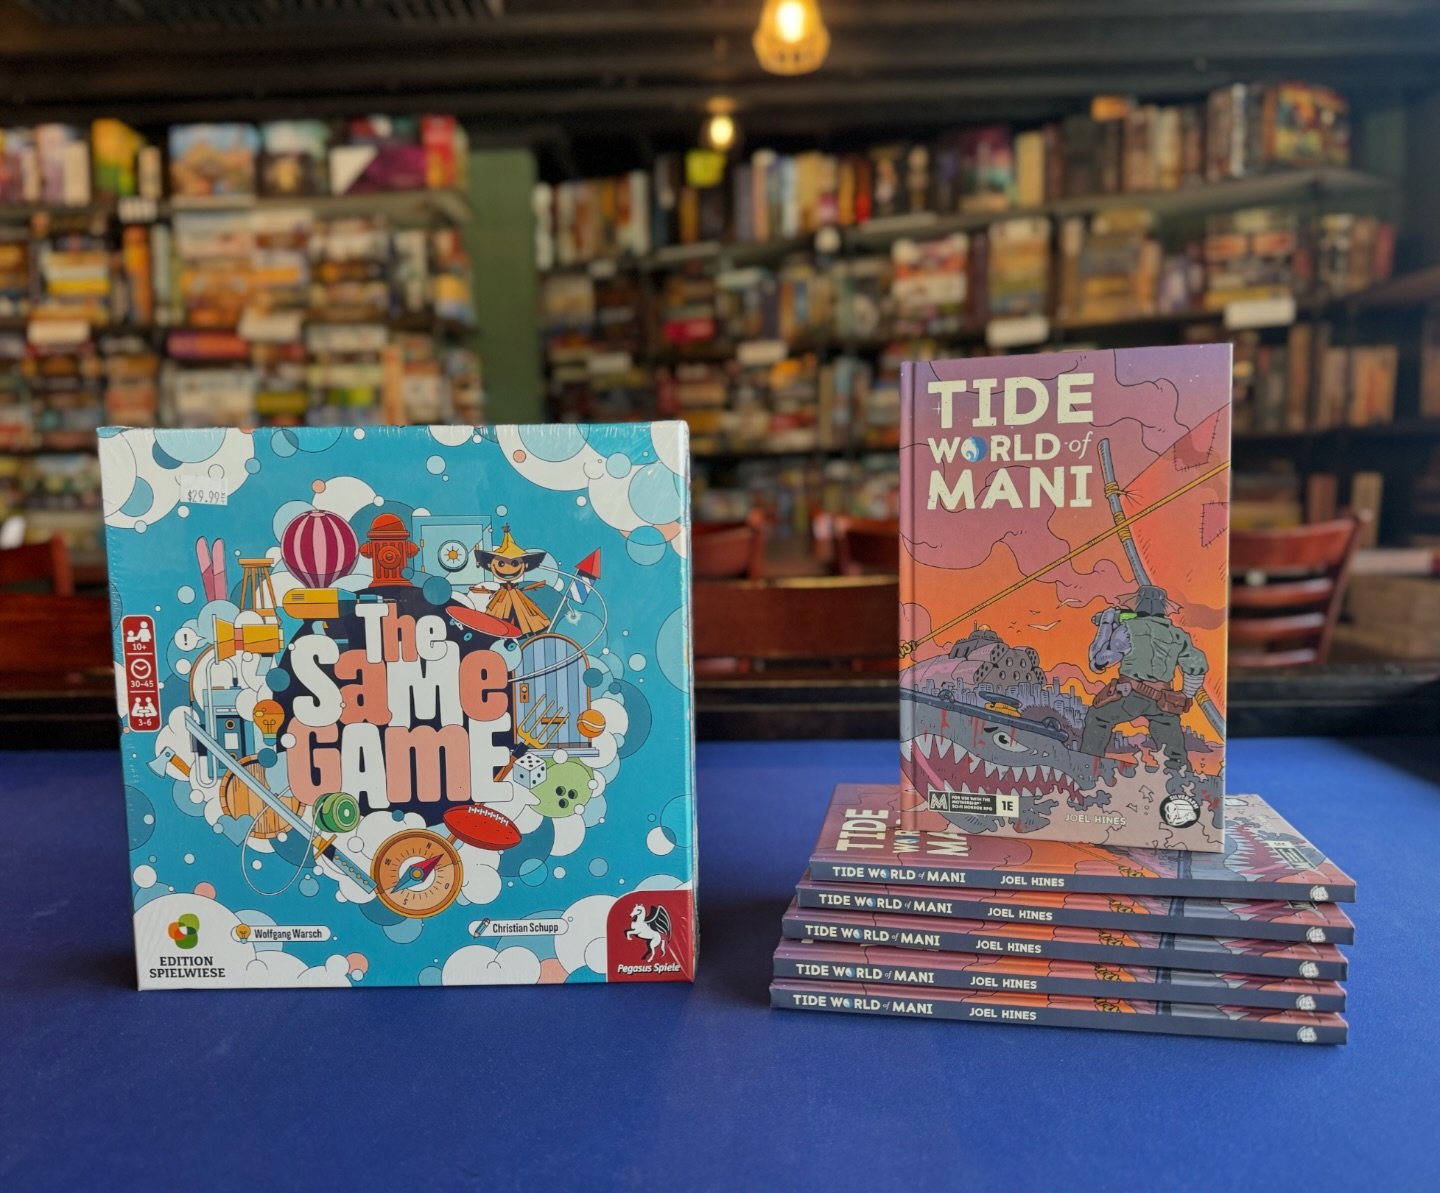 New releases!

The Same Game is a co-op party game from the designer of Wavelength and Quacks. We only have one copy for now but added one to the game library as well.

Tide World of Mani is the newest Mothership TTRPG module from Joel Hines.